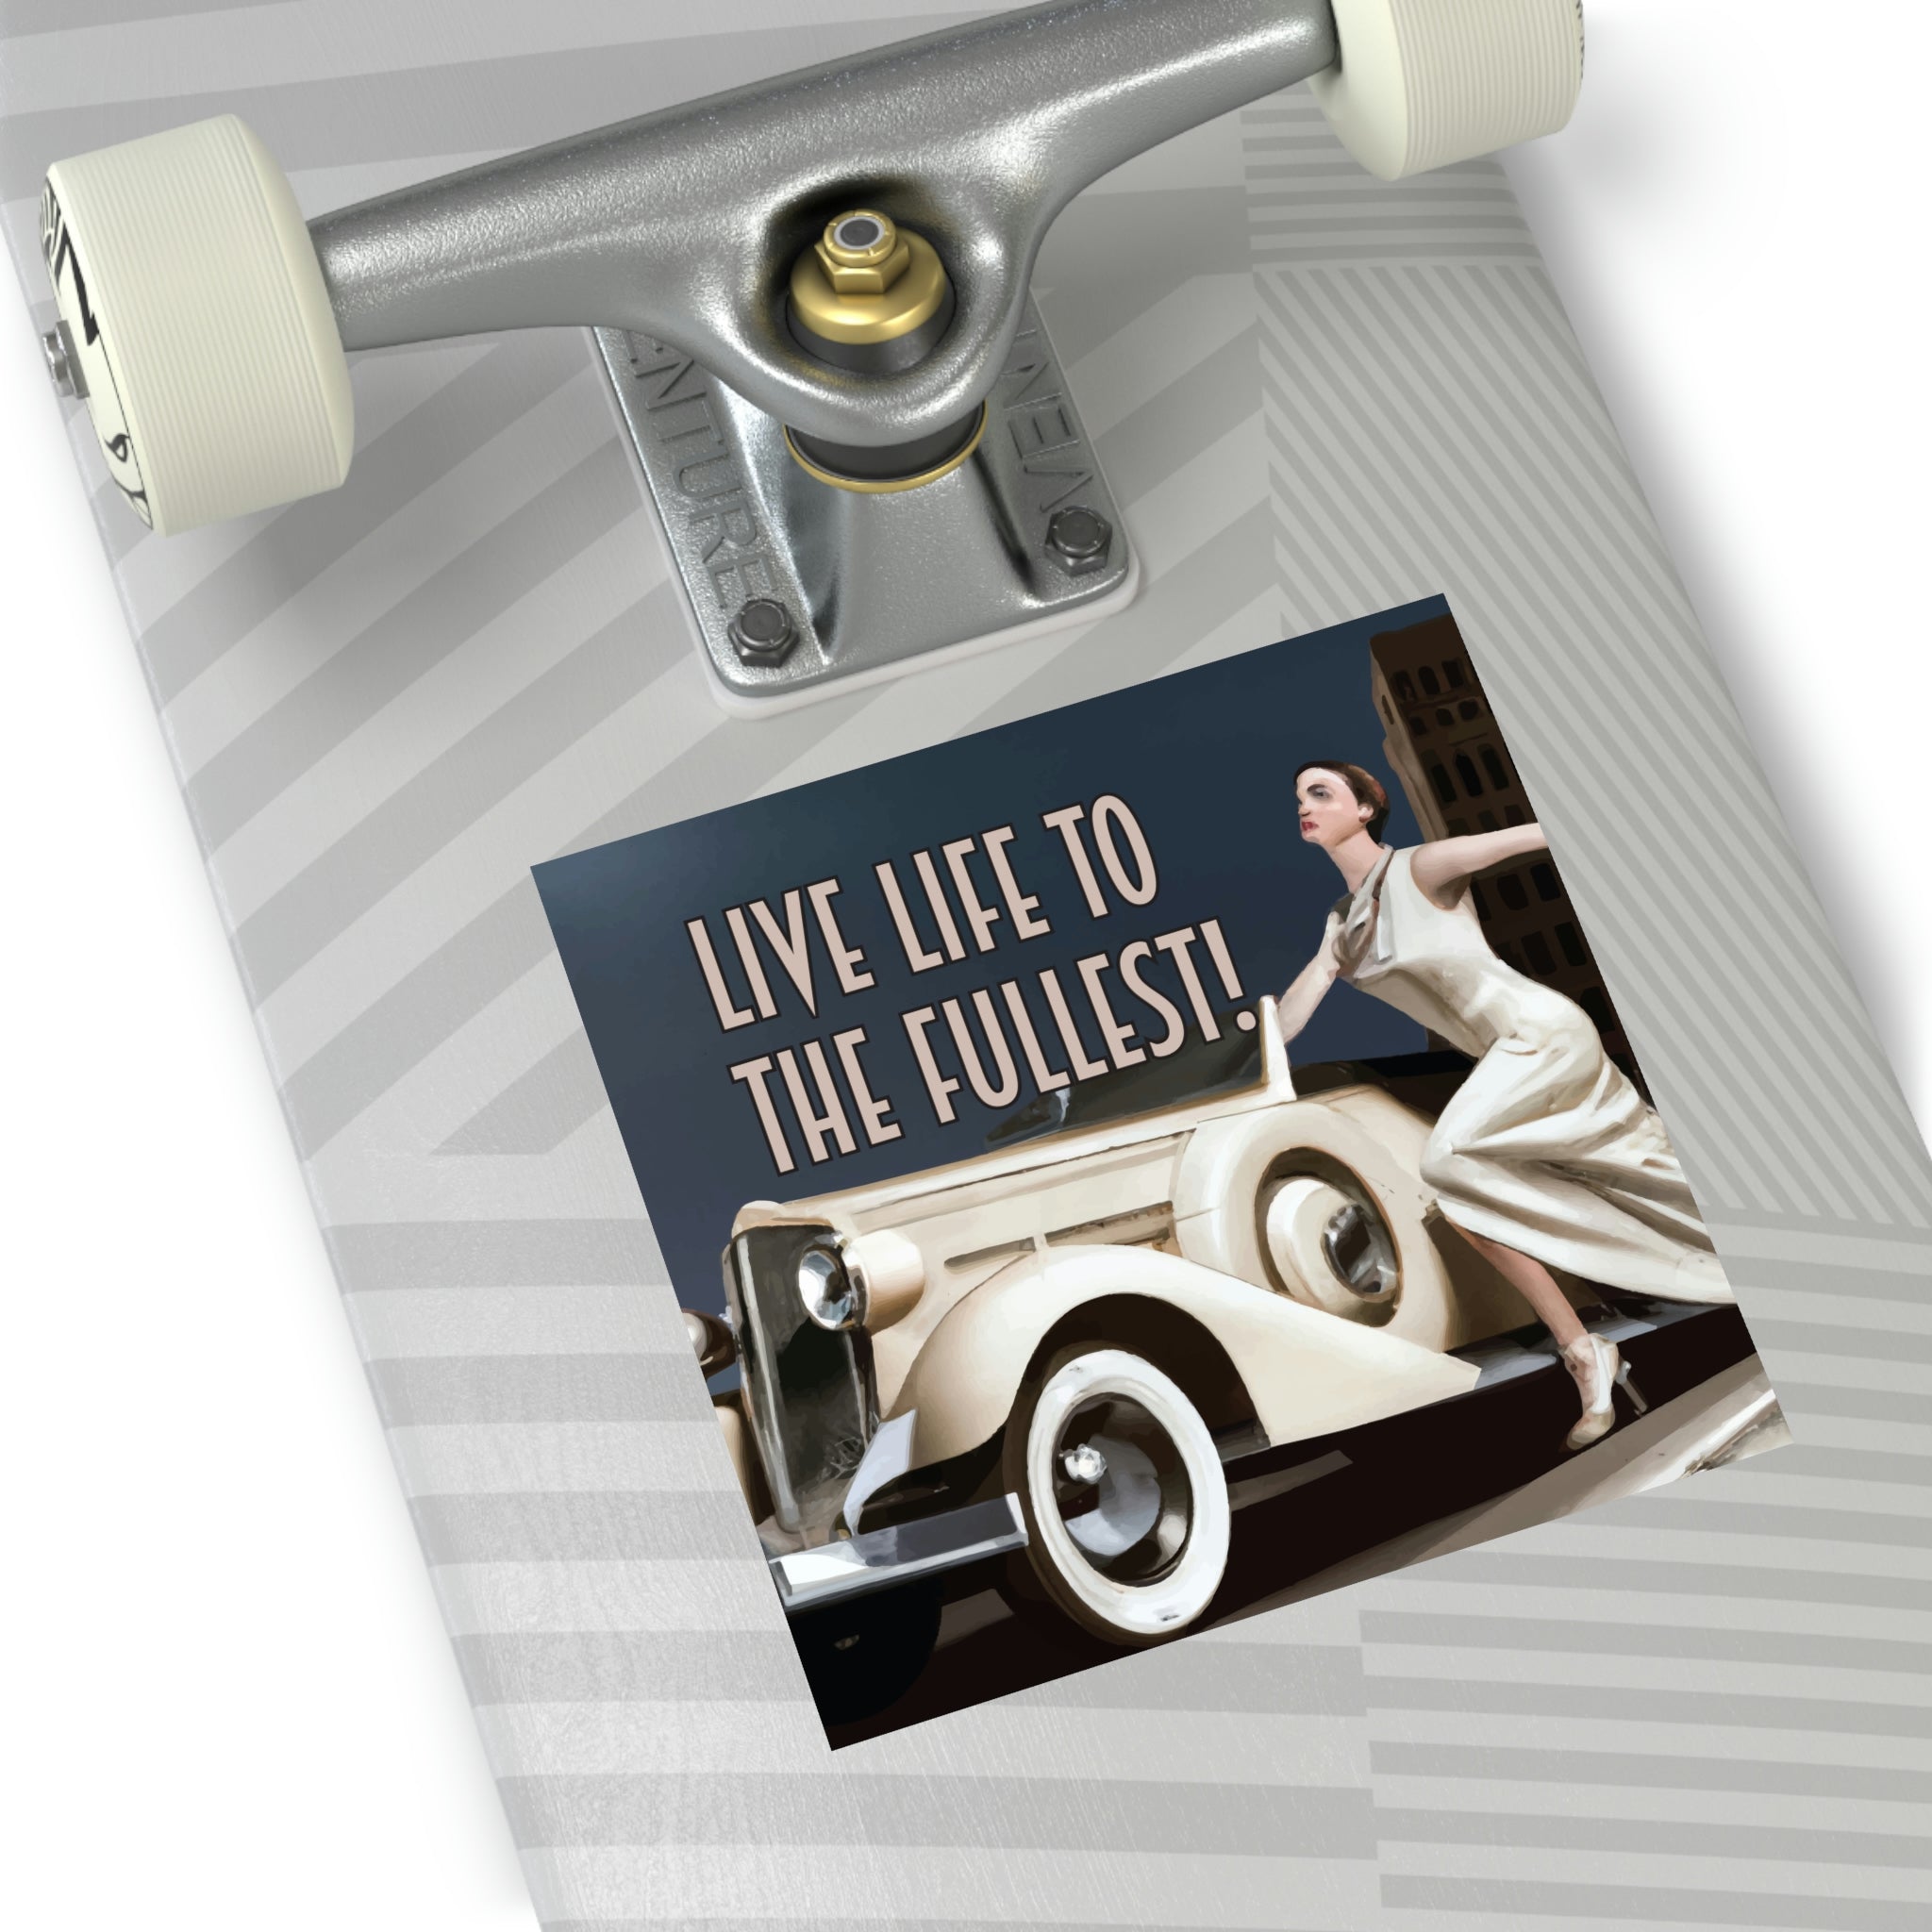 Live Life to the Fullest: Get Vintage Sticker & Show Your Ambition! #size_5x5-inches